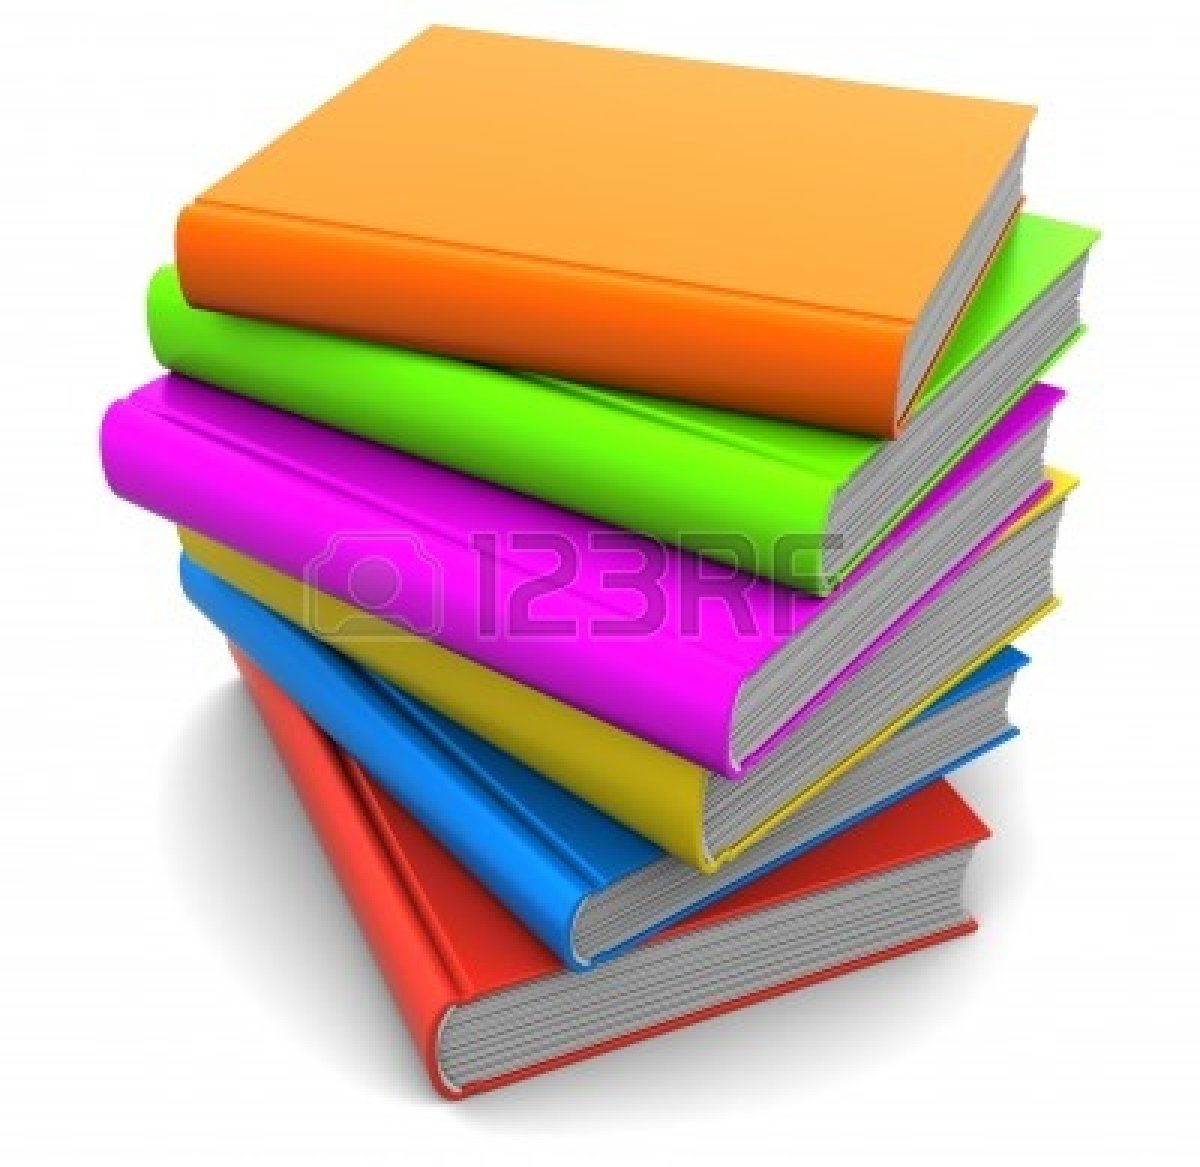 Row Of Books Illustration   Clipart Panda   Free Clipart Images